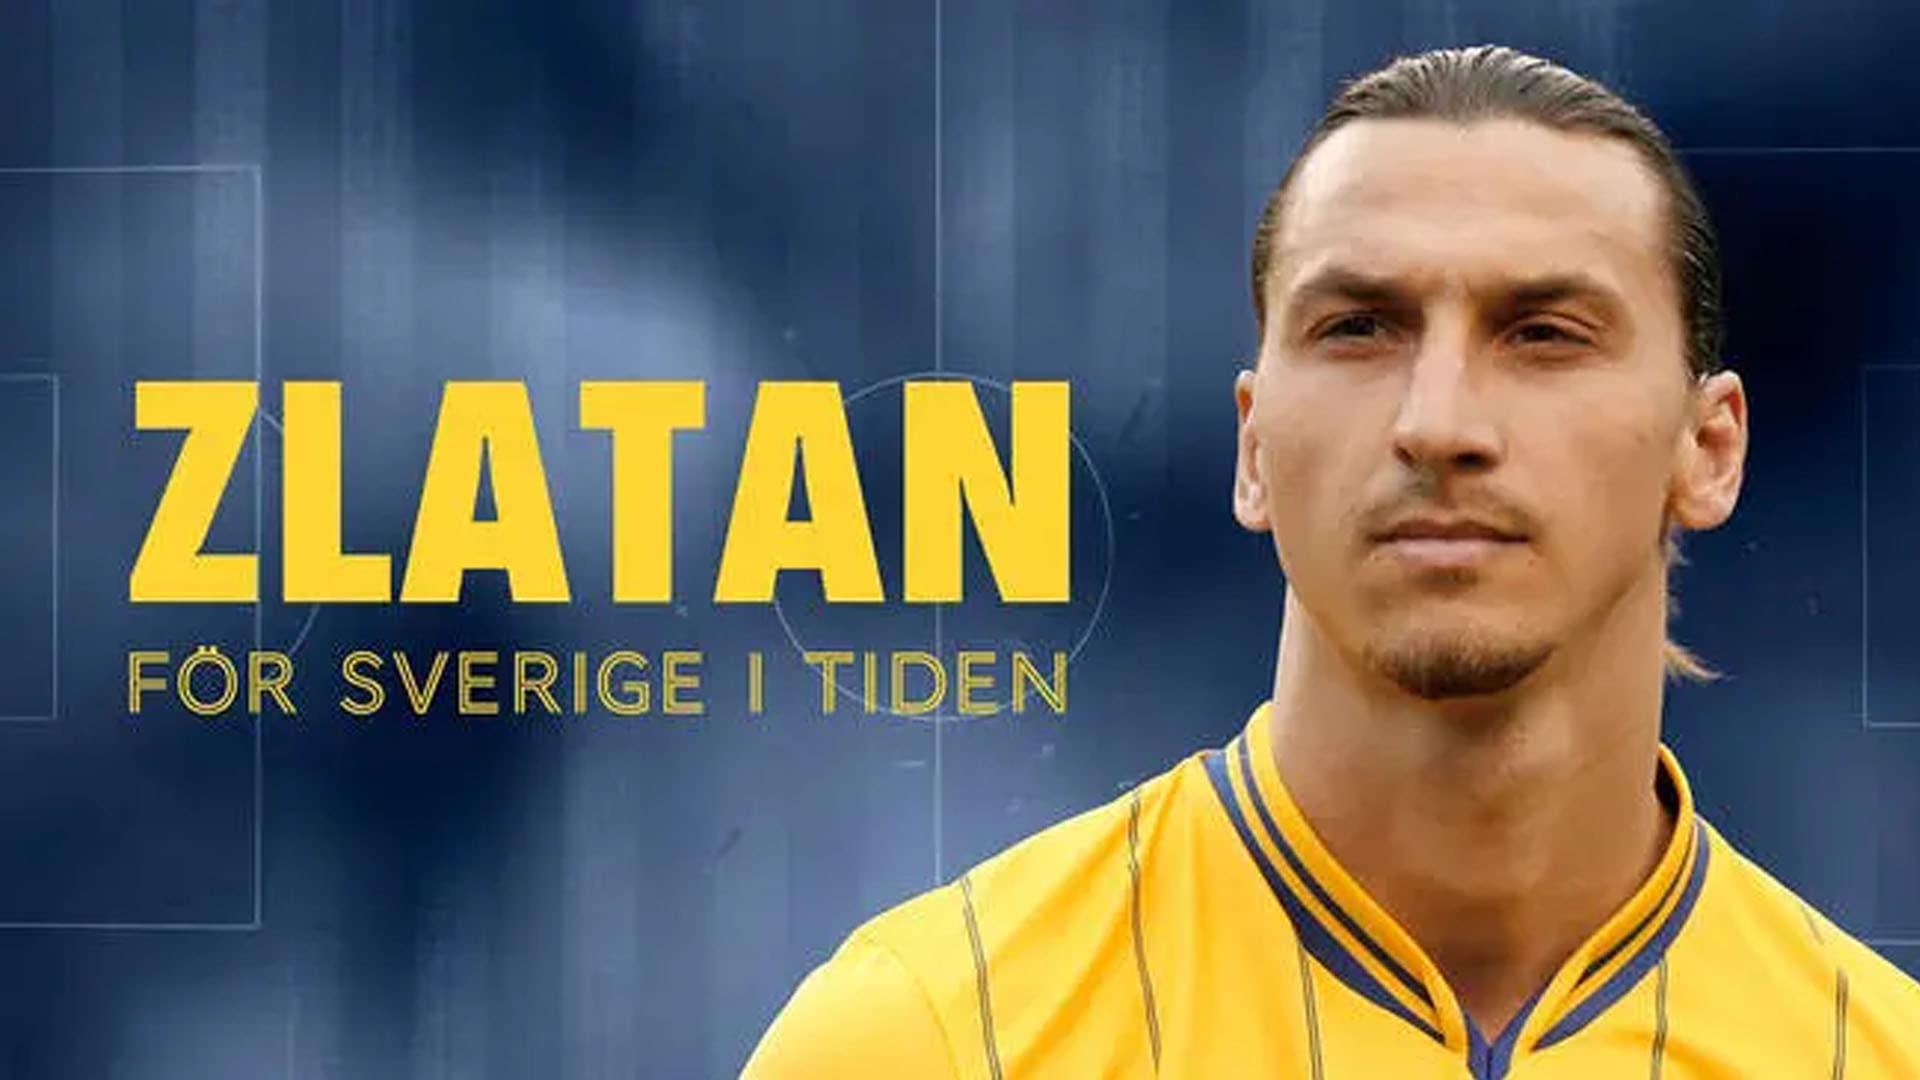 ZLATAN — For Sweden With The Times backdrop